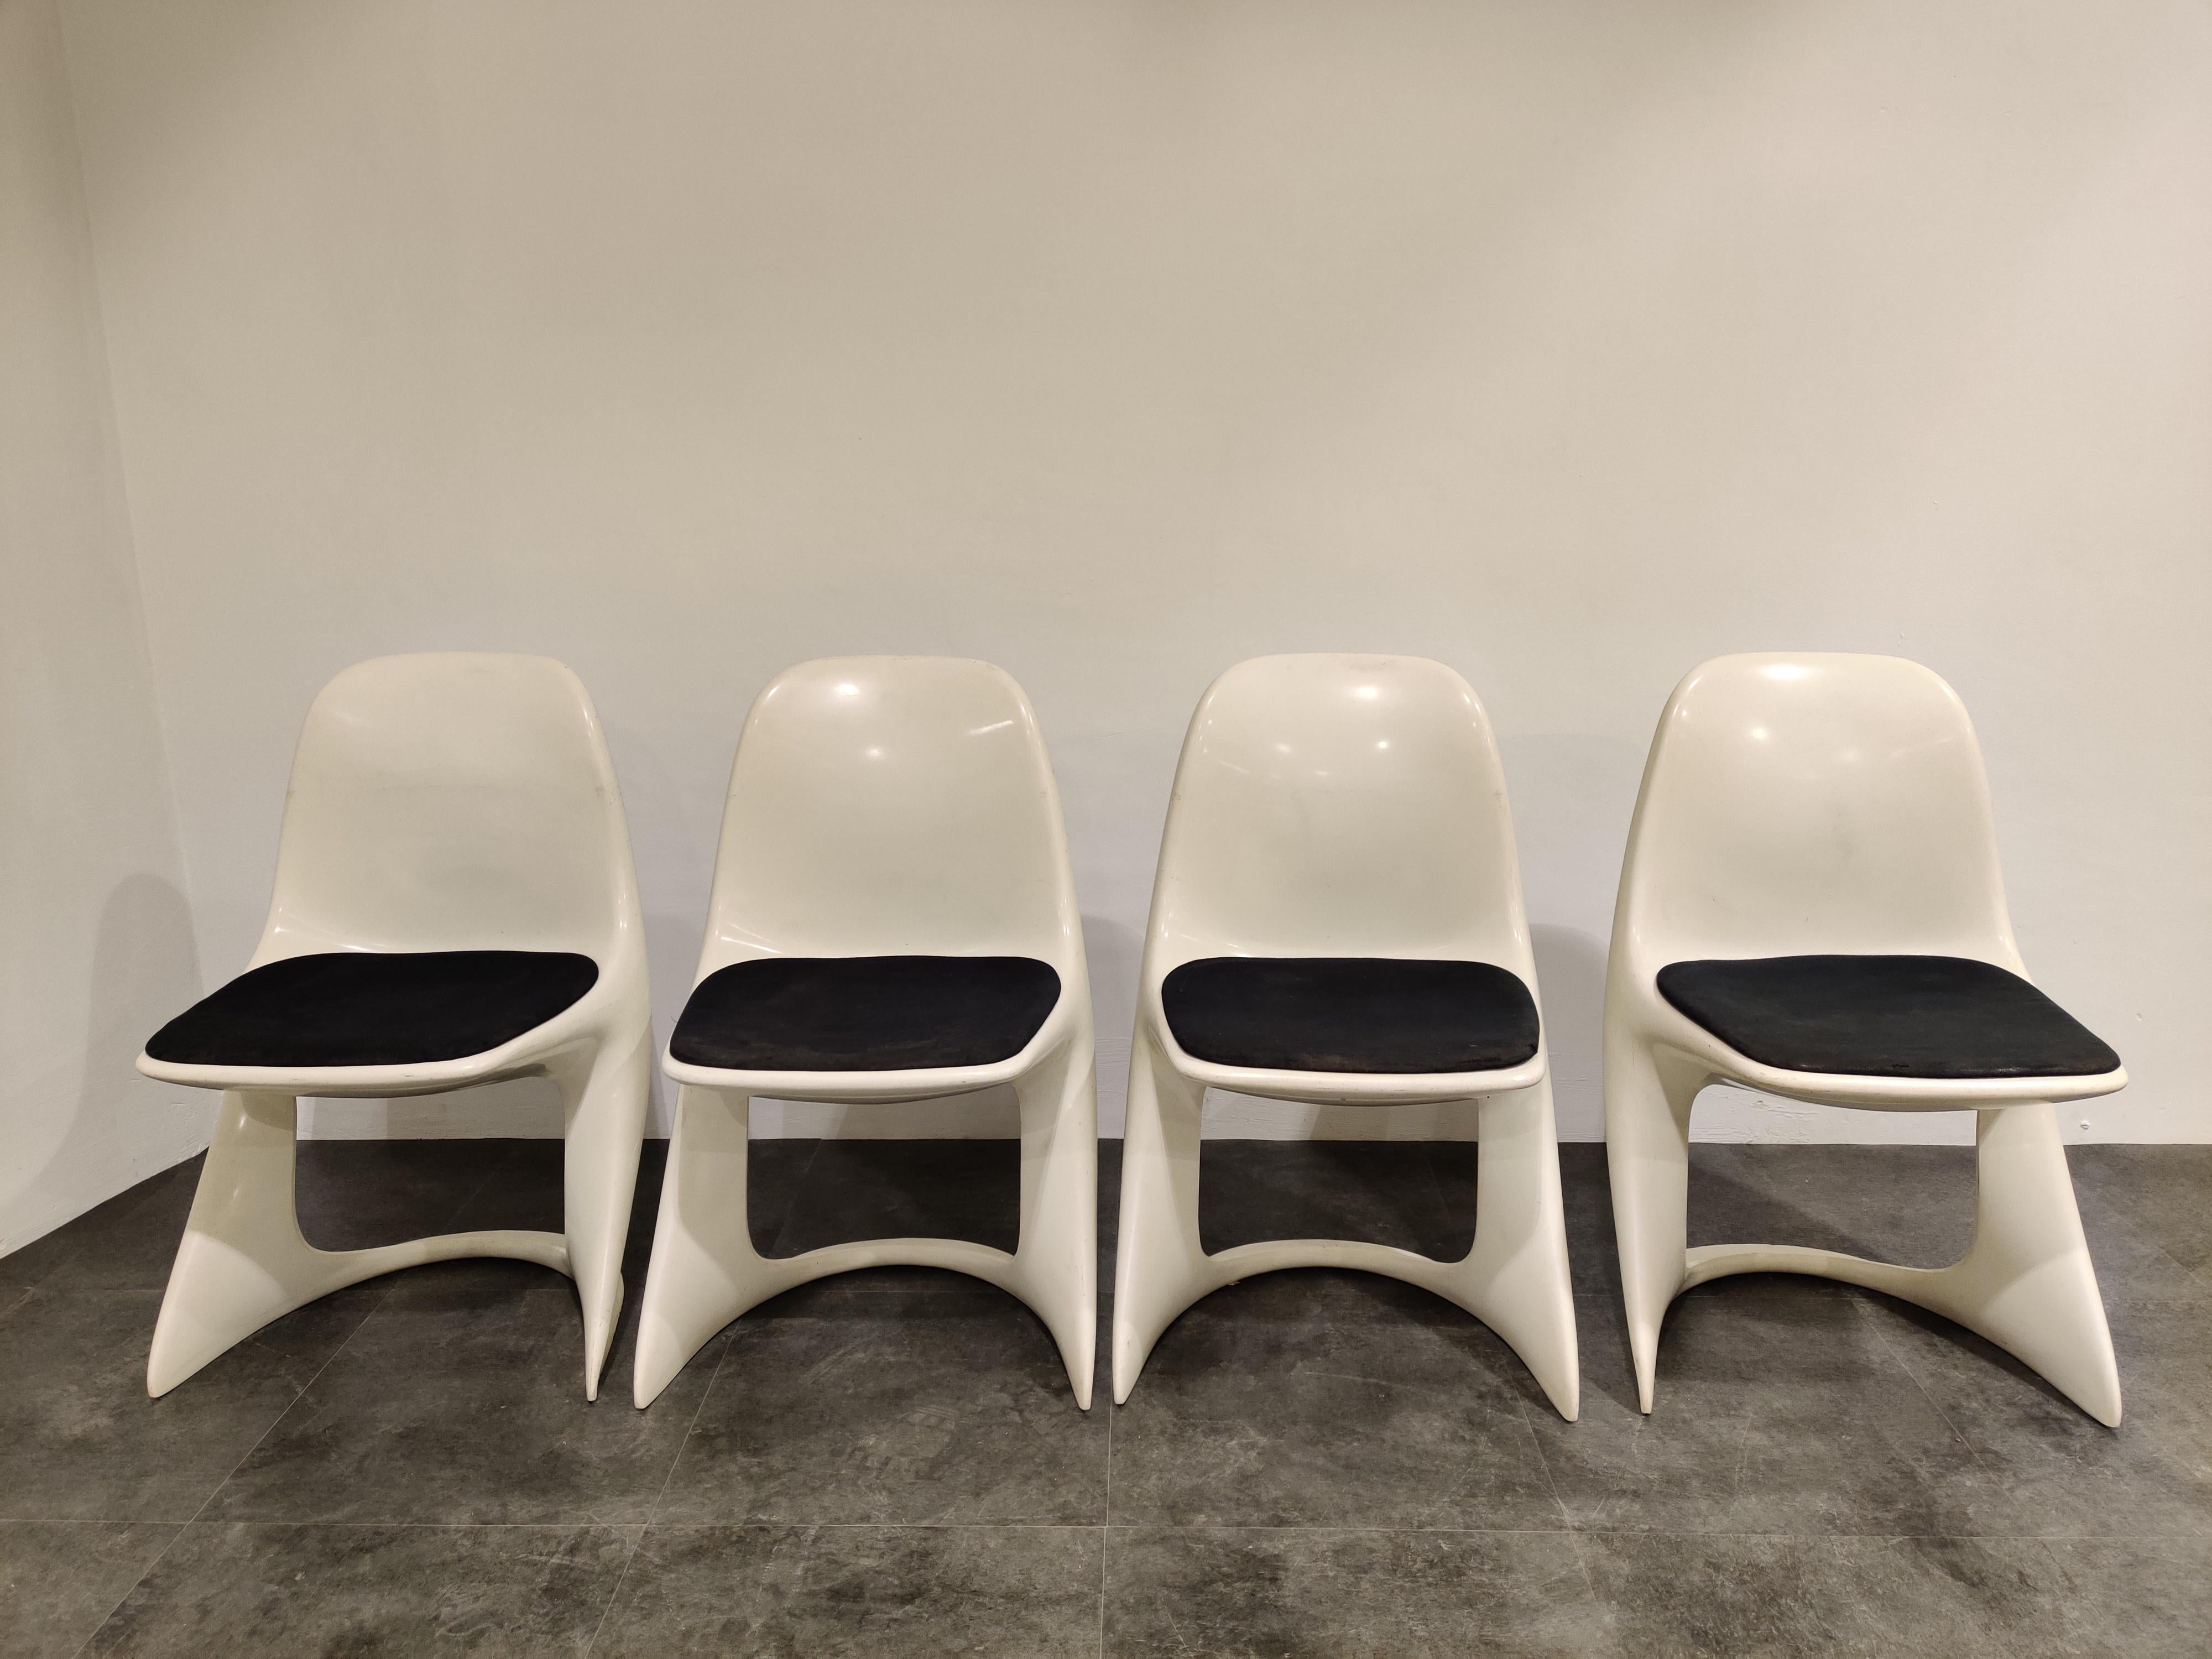 Space Age Set of 4 Casalino Dining Chair by Alexander Begge for Casala, 1970s